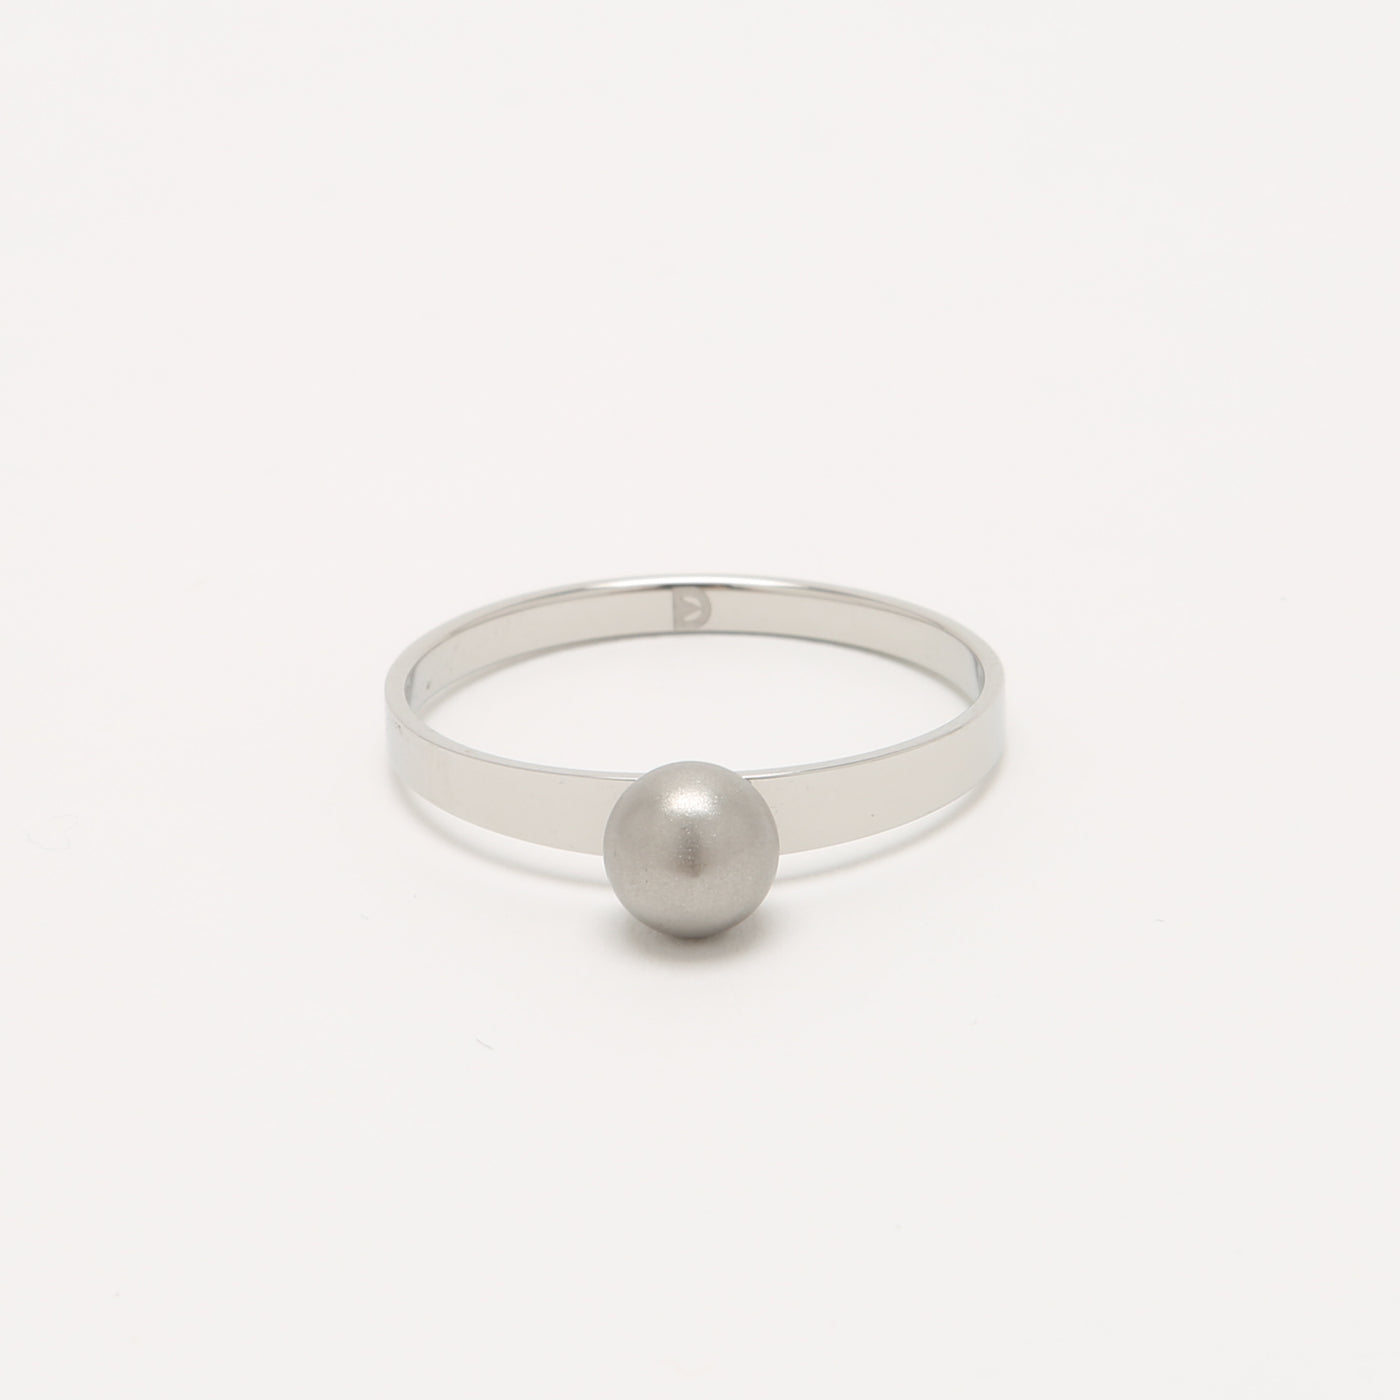 Chic Self Defense Ring with a Sandblast Sphere Top | Defender Ring